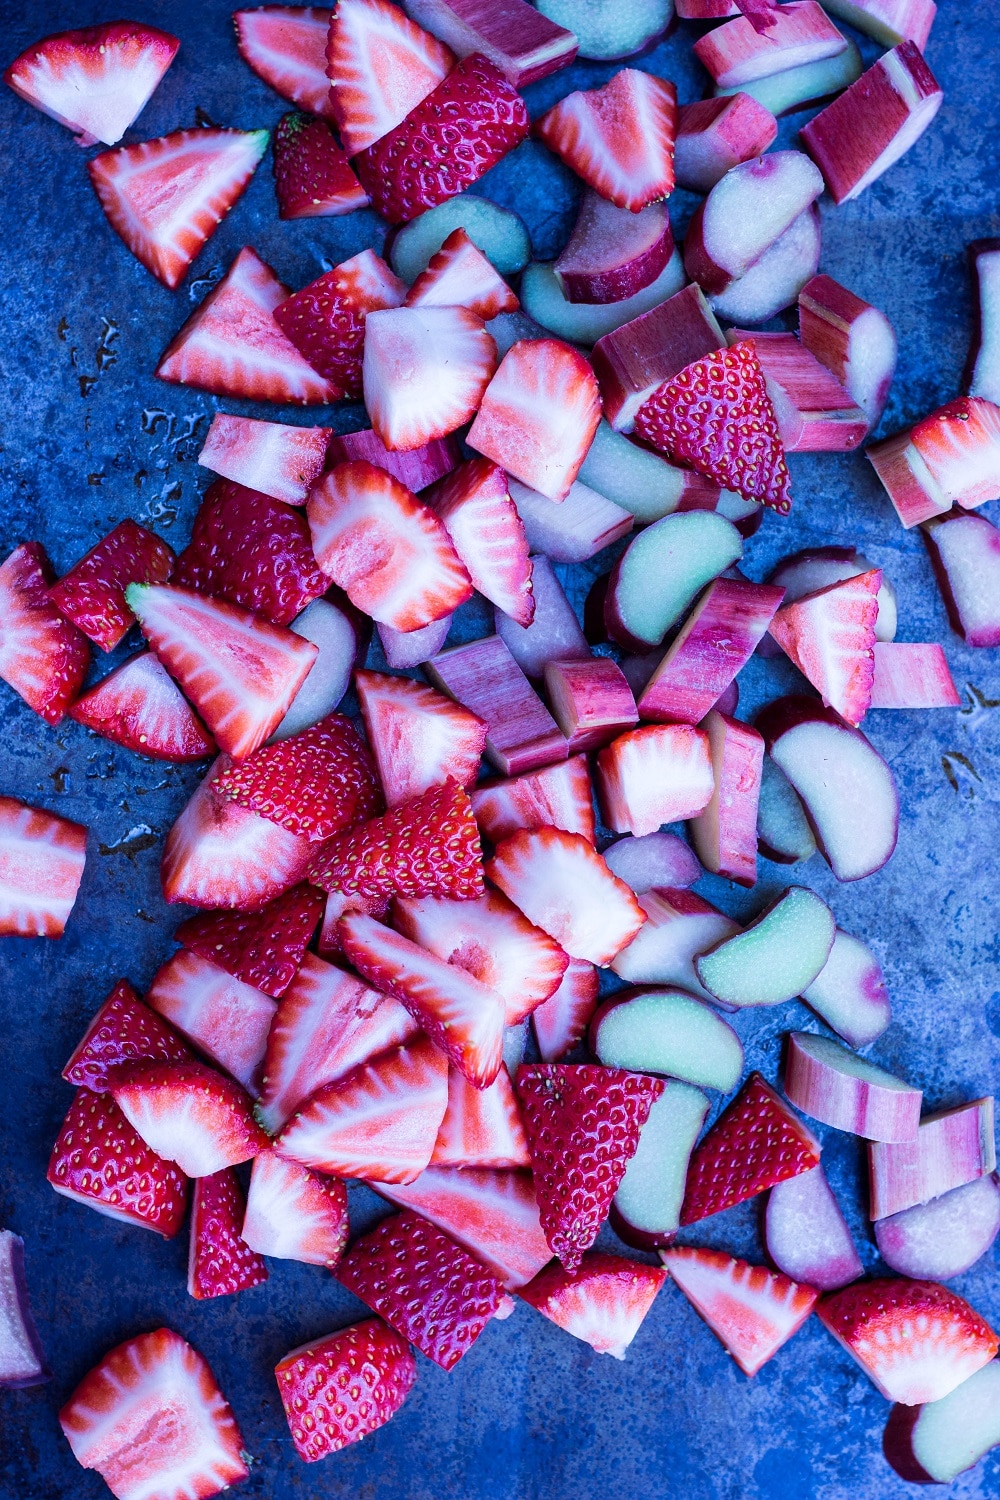 Strawberry Rhubarb & Lime Popsicle ingredients chopped up on a platter